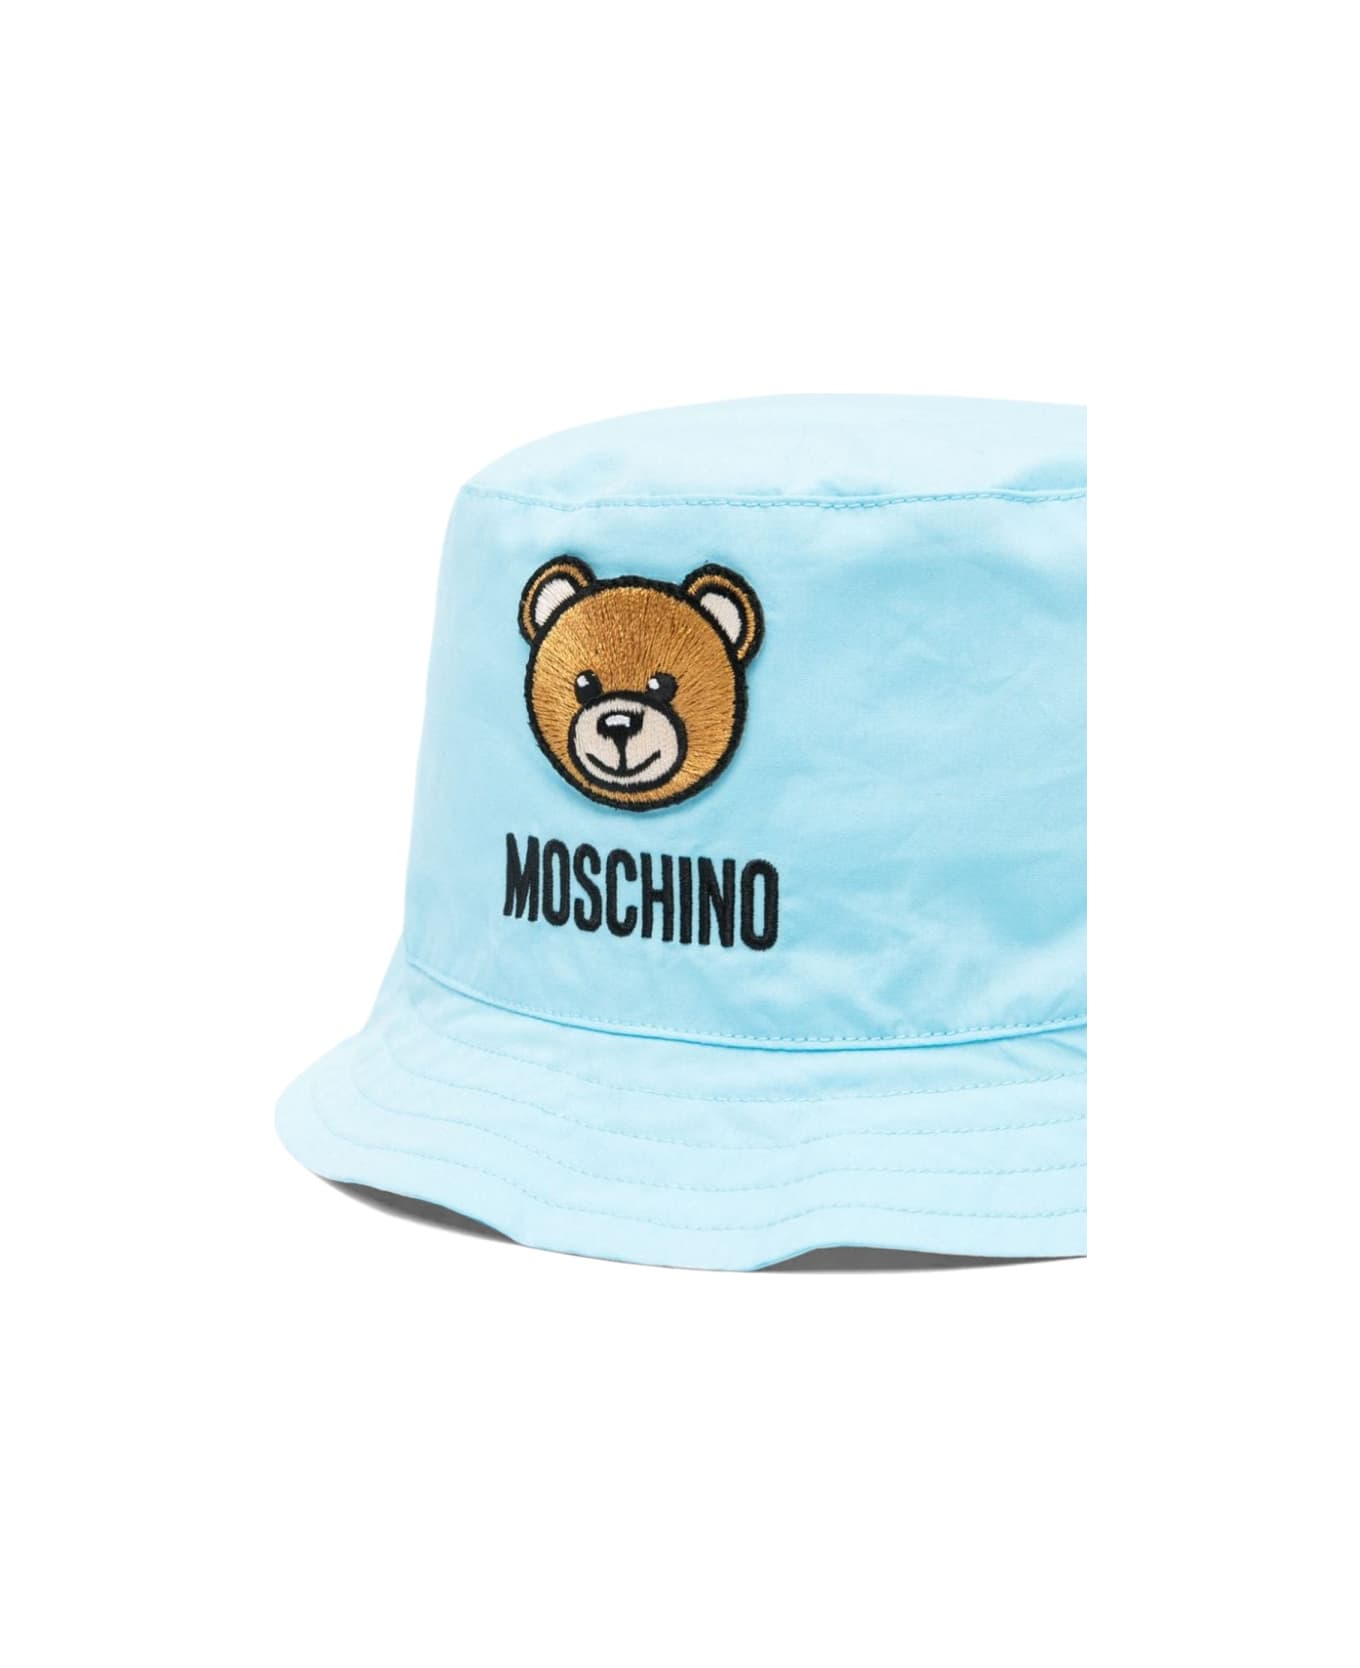 Moschino Hat With Gift Box - BLUE アクセサリー＆ギフト